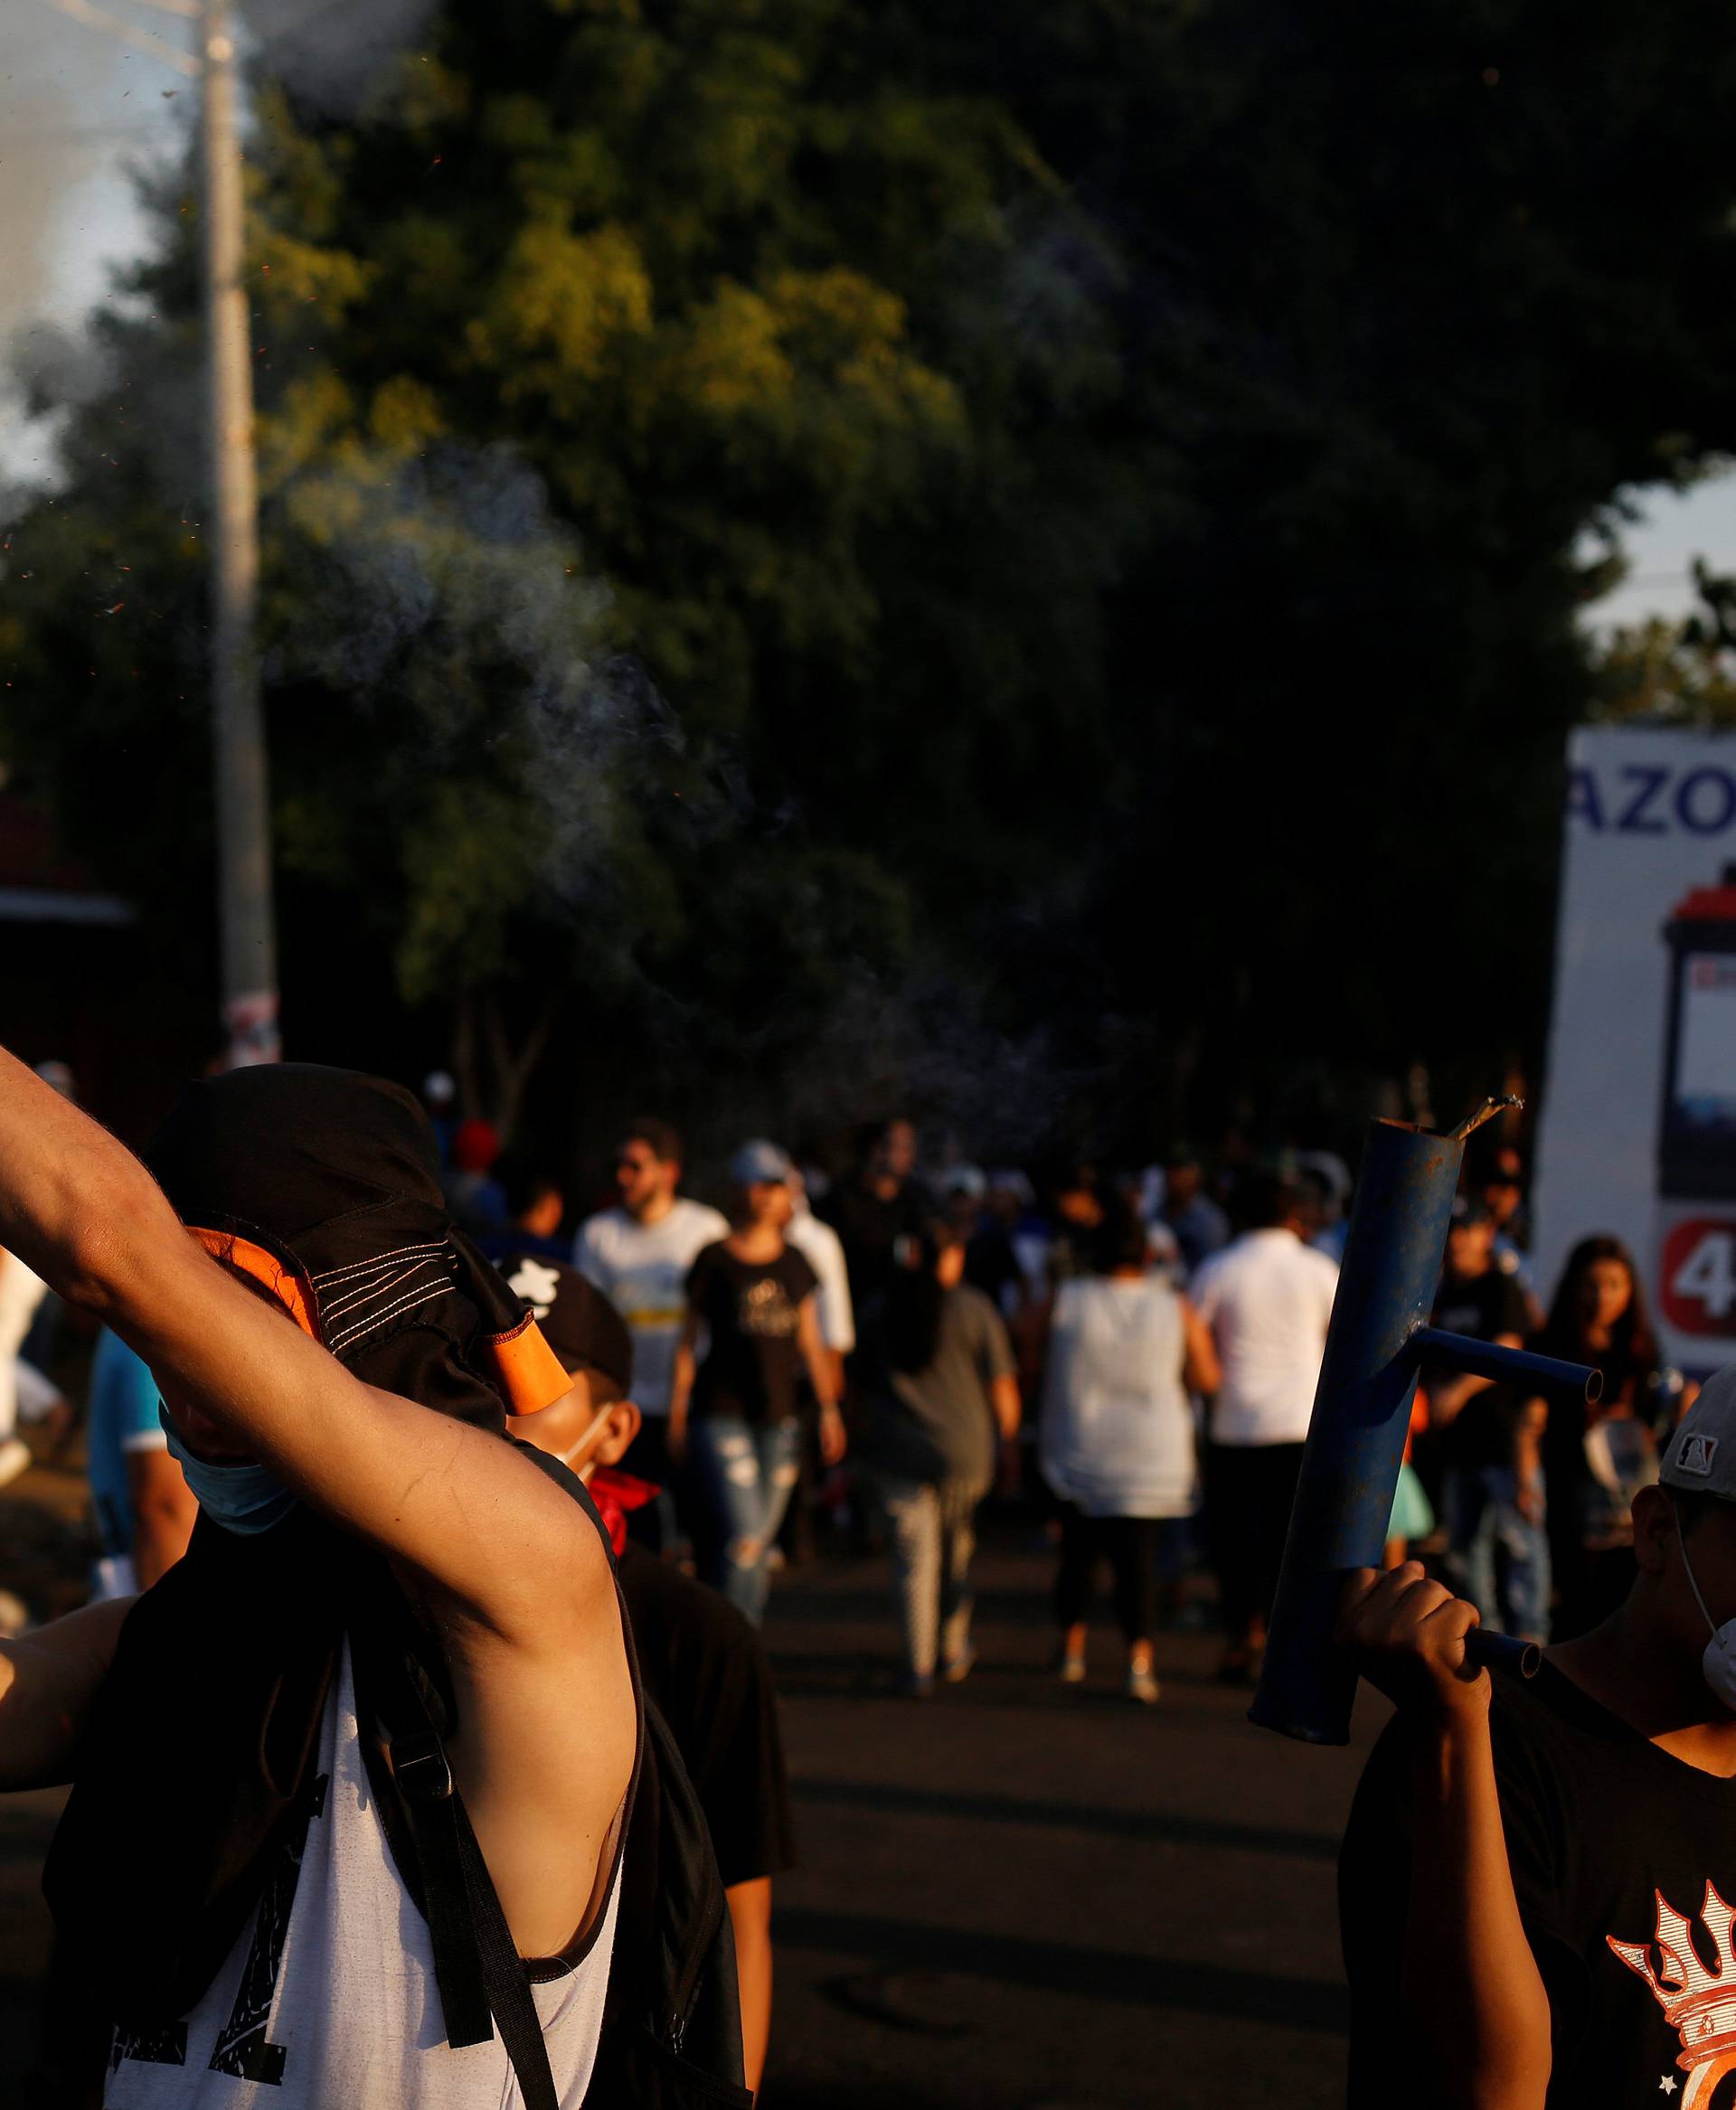 A demonstrator fires a homemade weapon during a protest against police violence and the government of Nicaraguan President Daniel Ortega in Managua